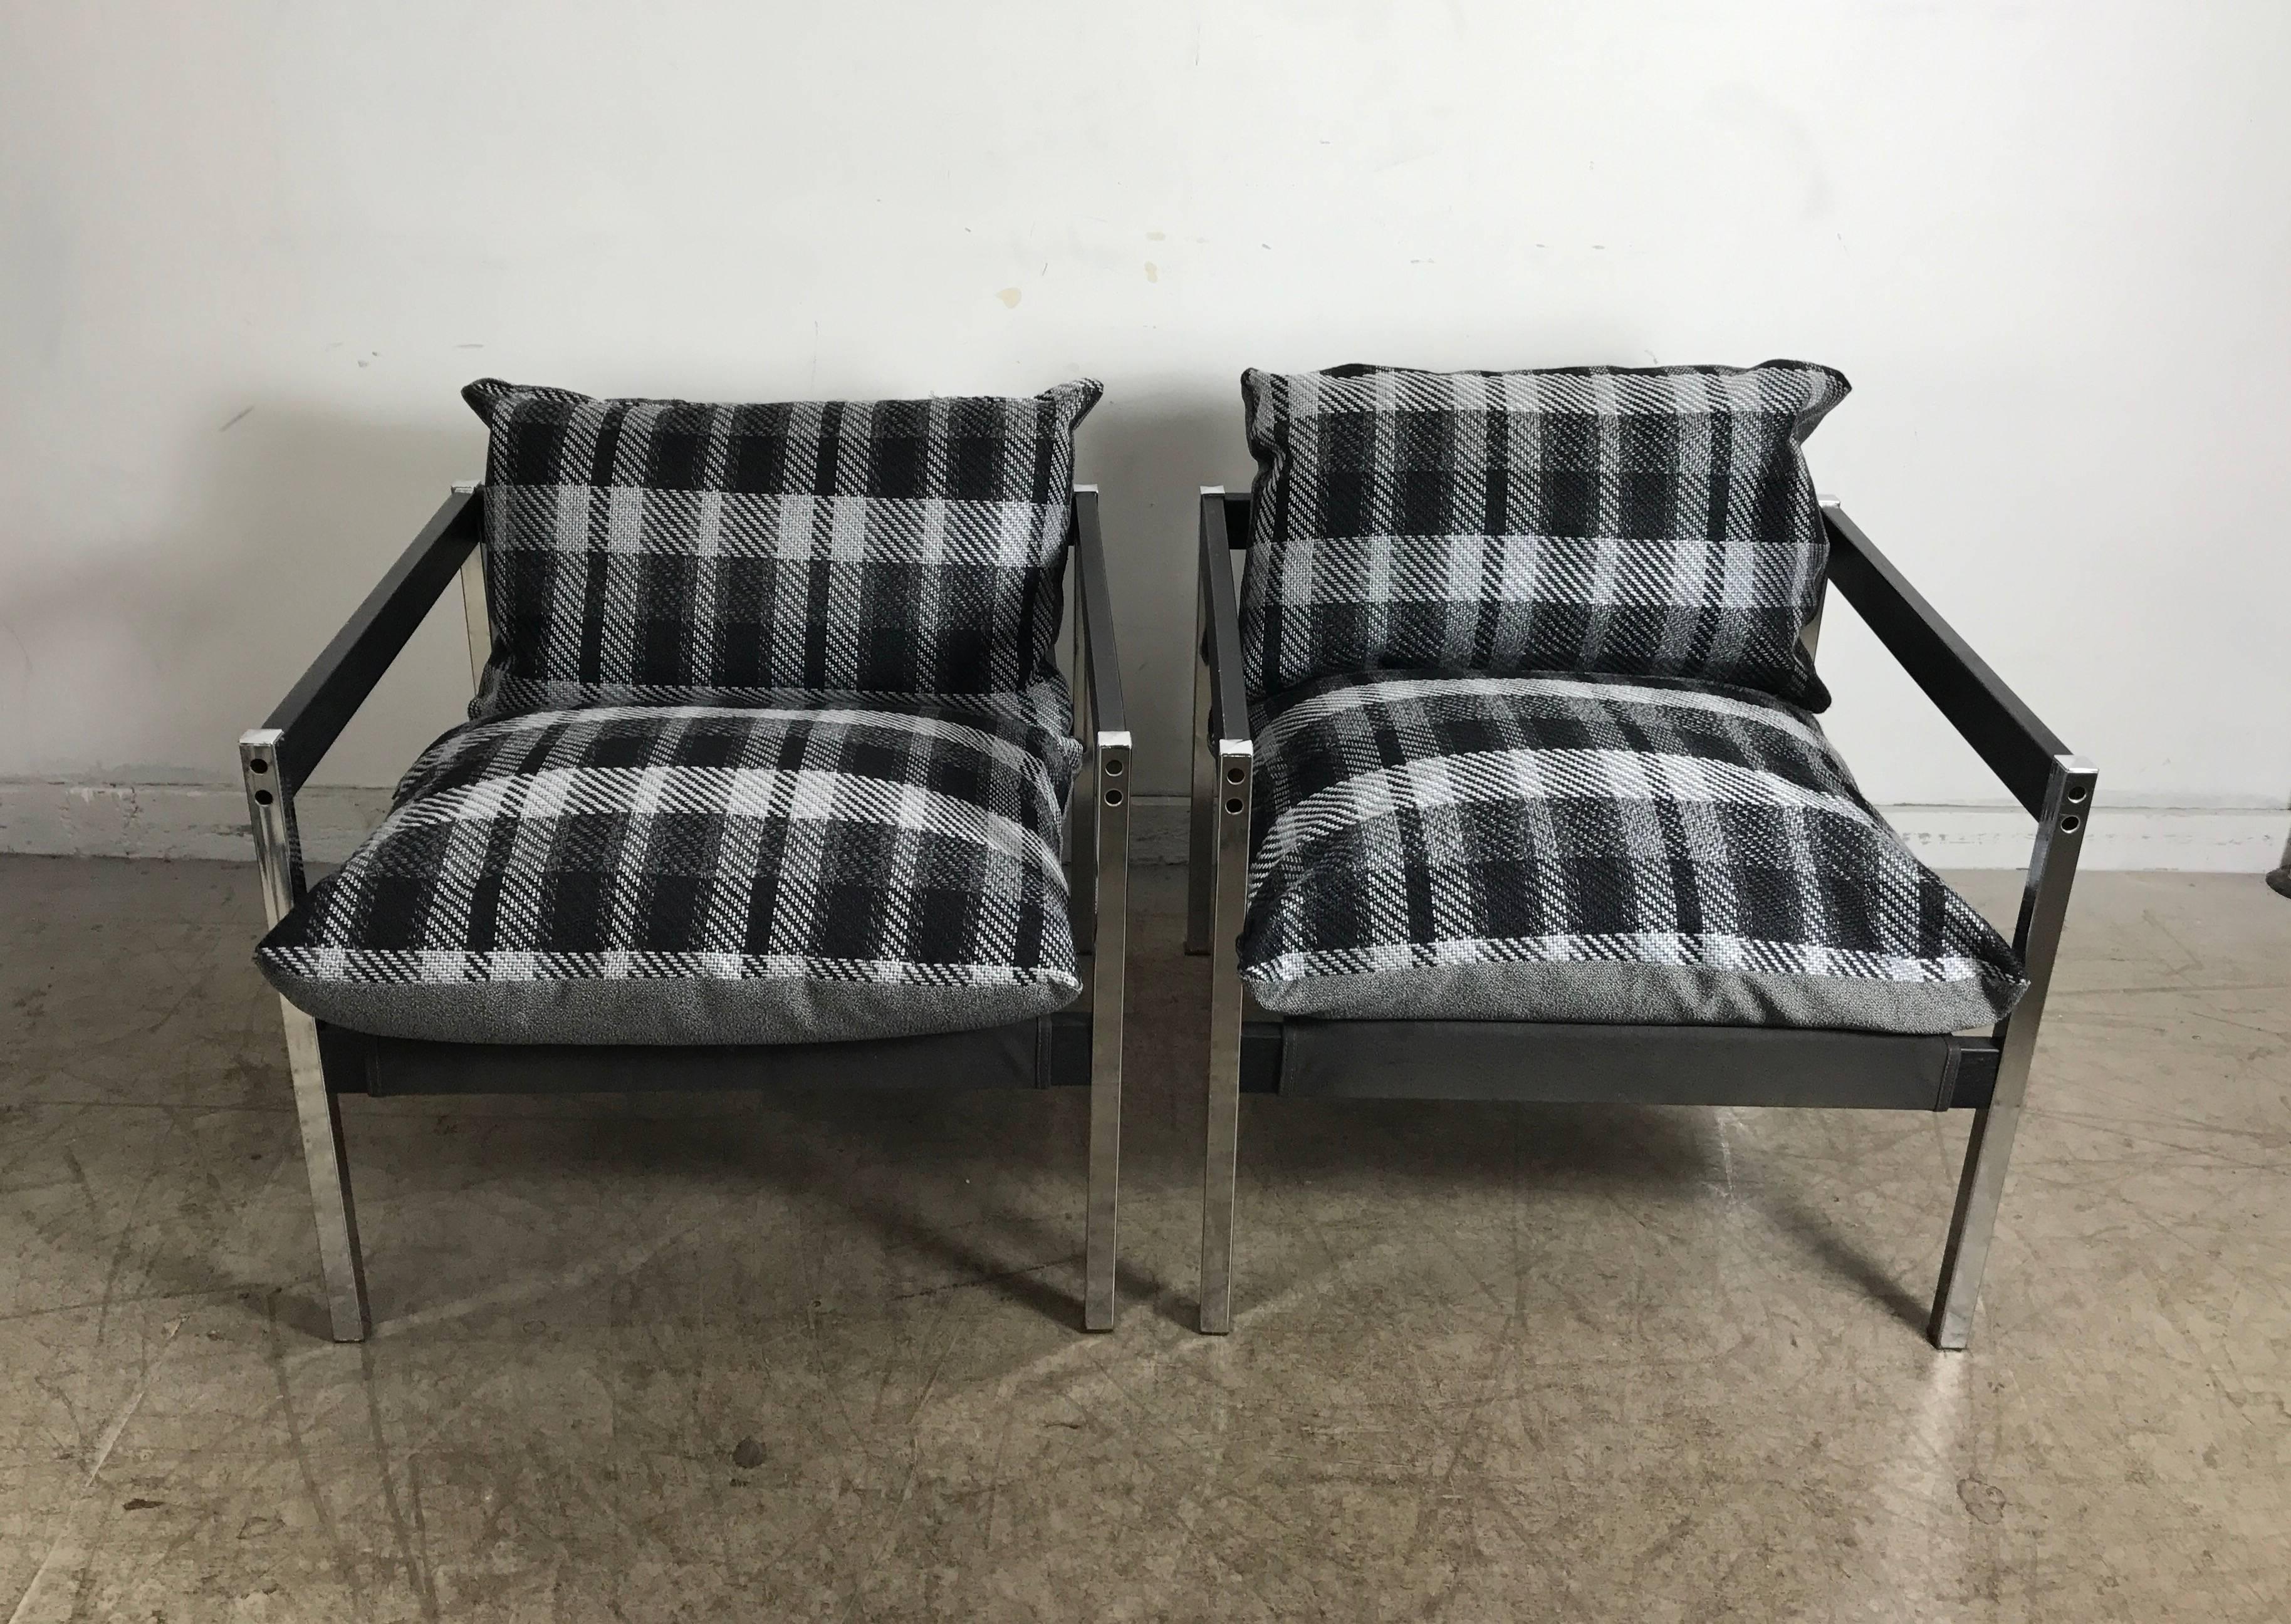 American Classic 1970s Even Arm Chrome and Wood Sling Chairs in Bauhaus Style